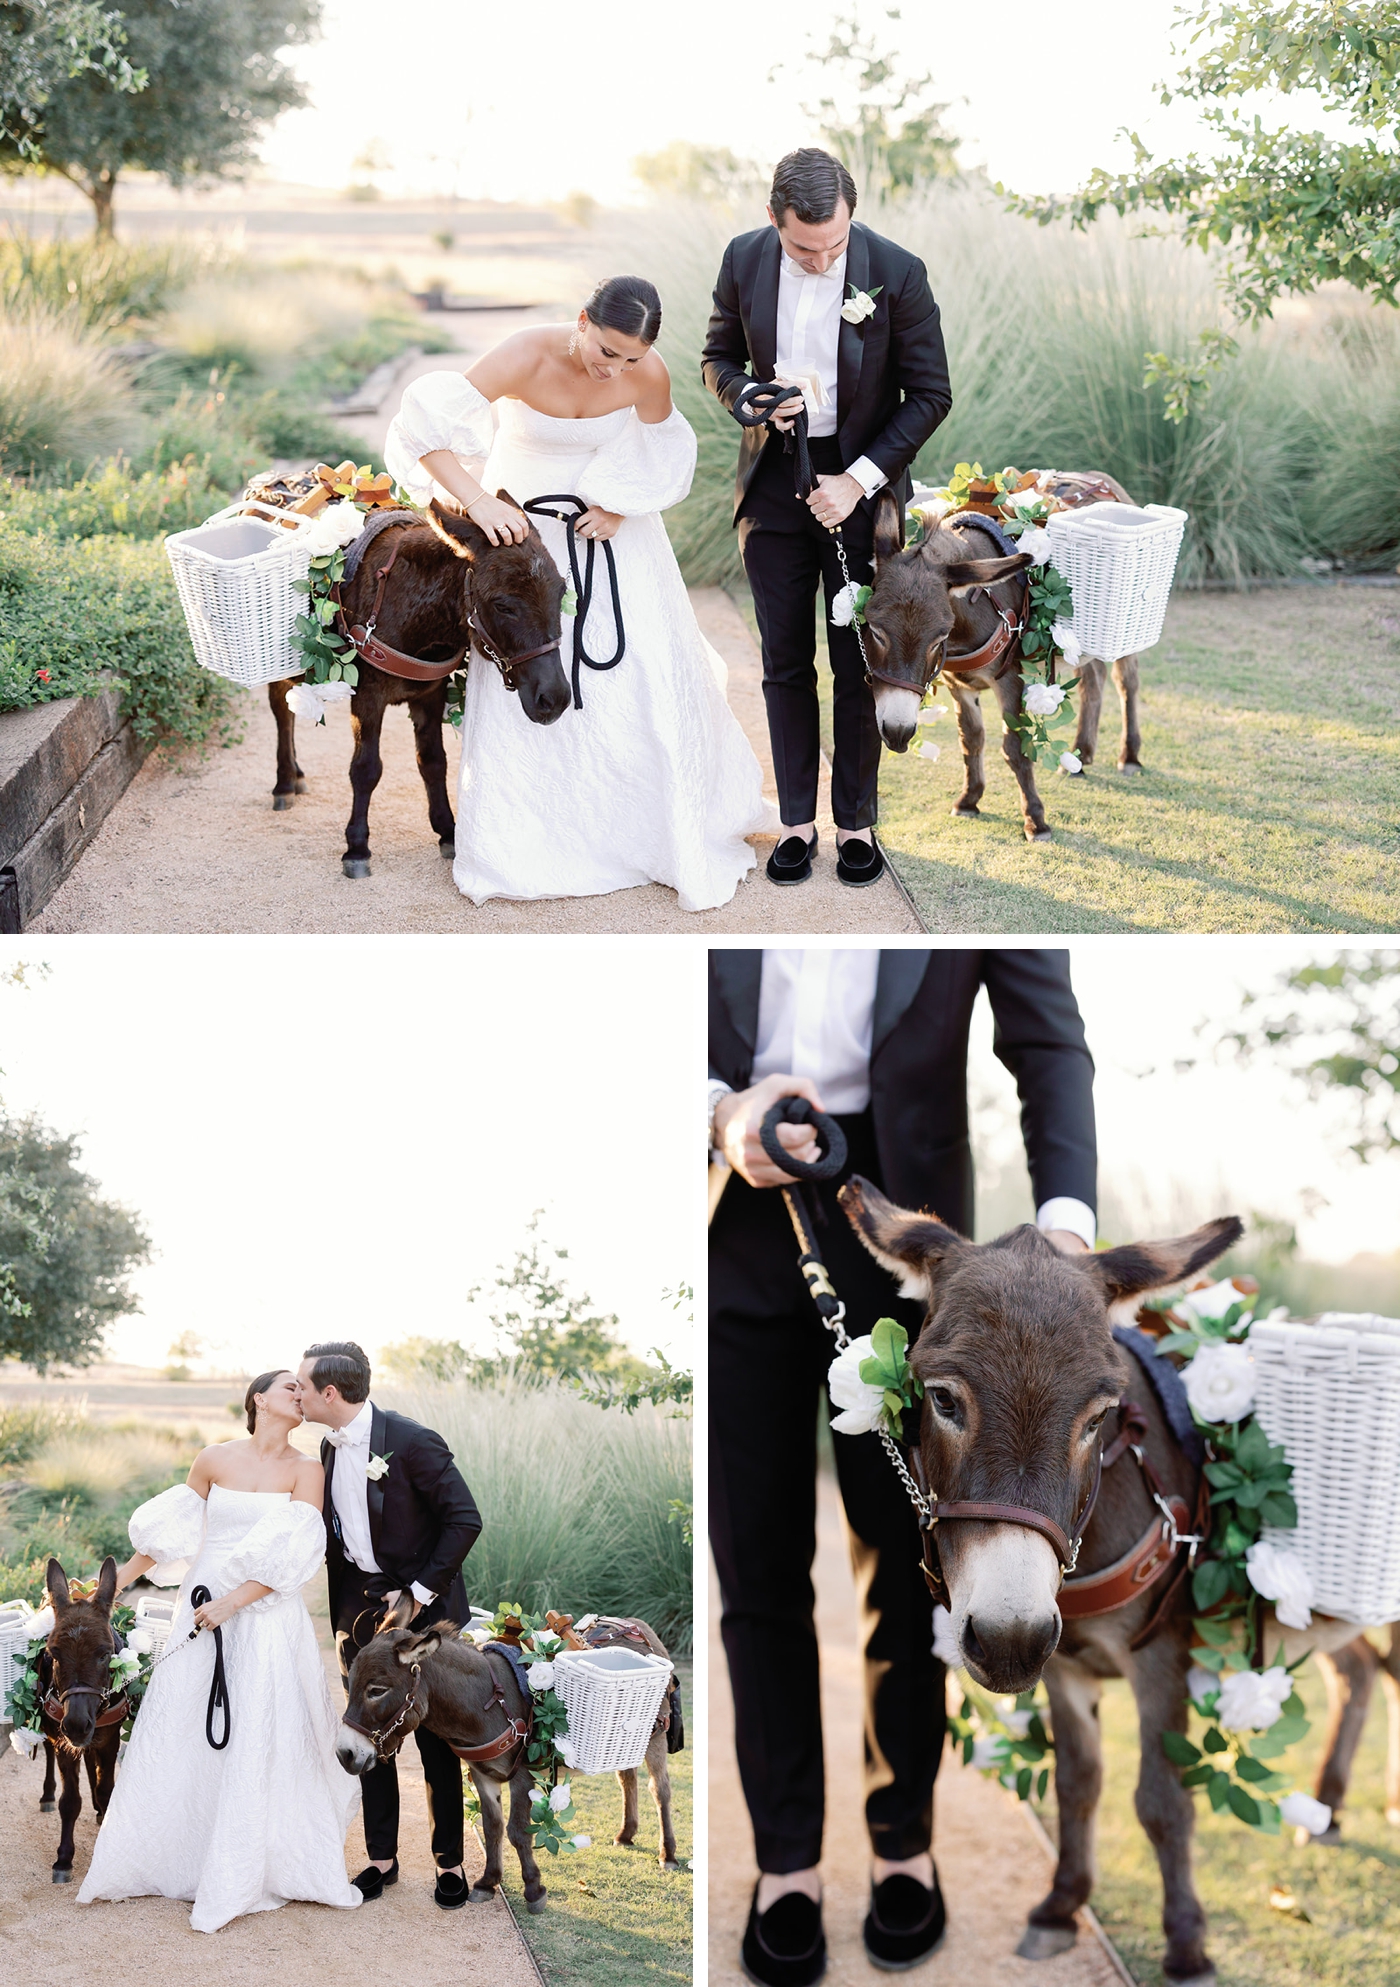 Beer Burros at a wedding in Austin, Texas